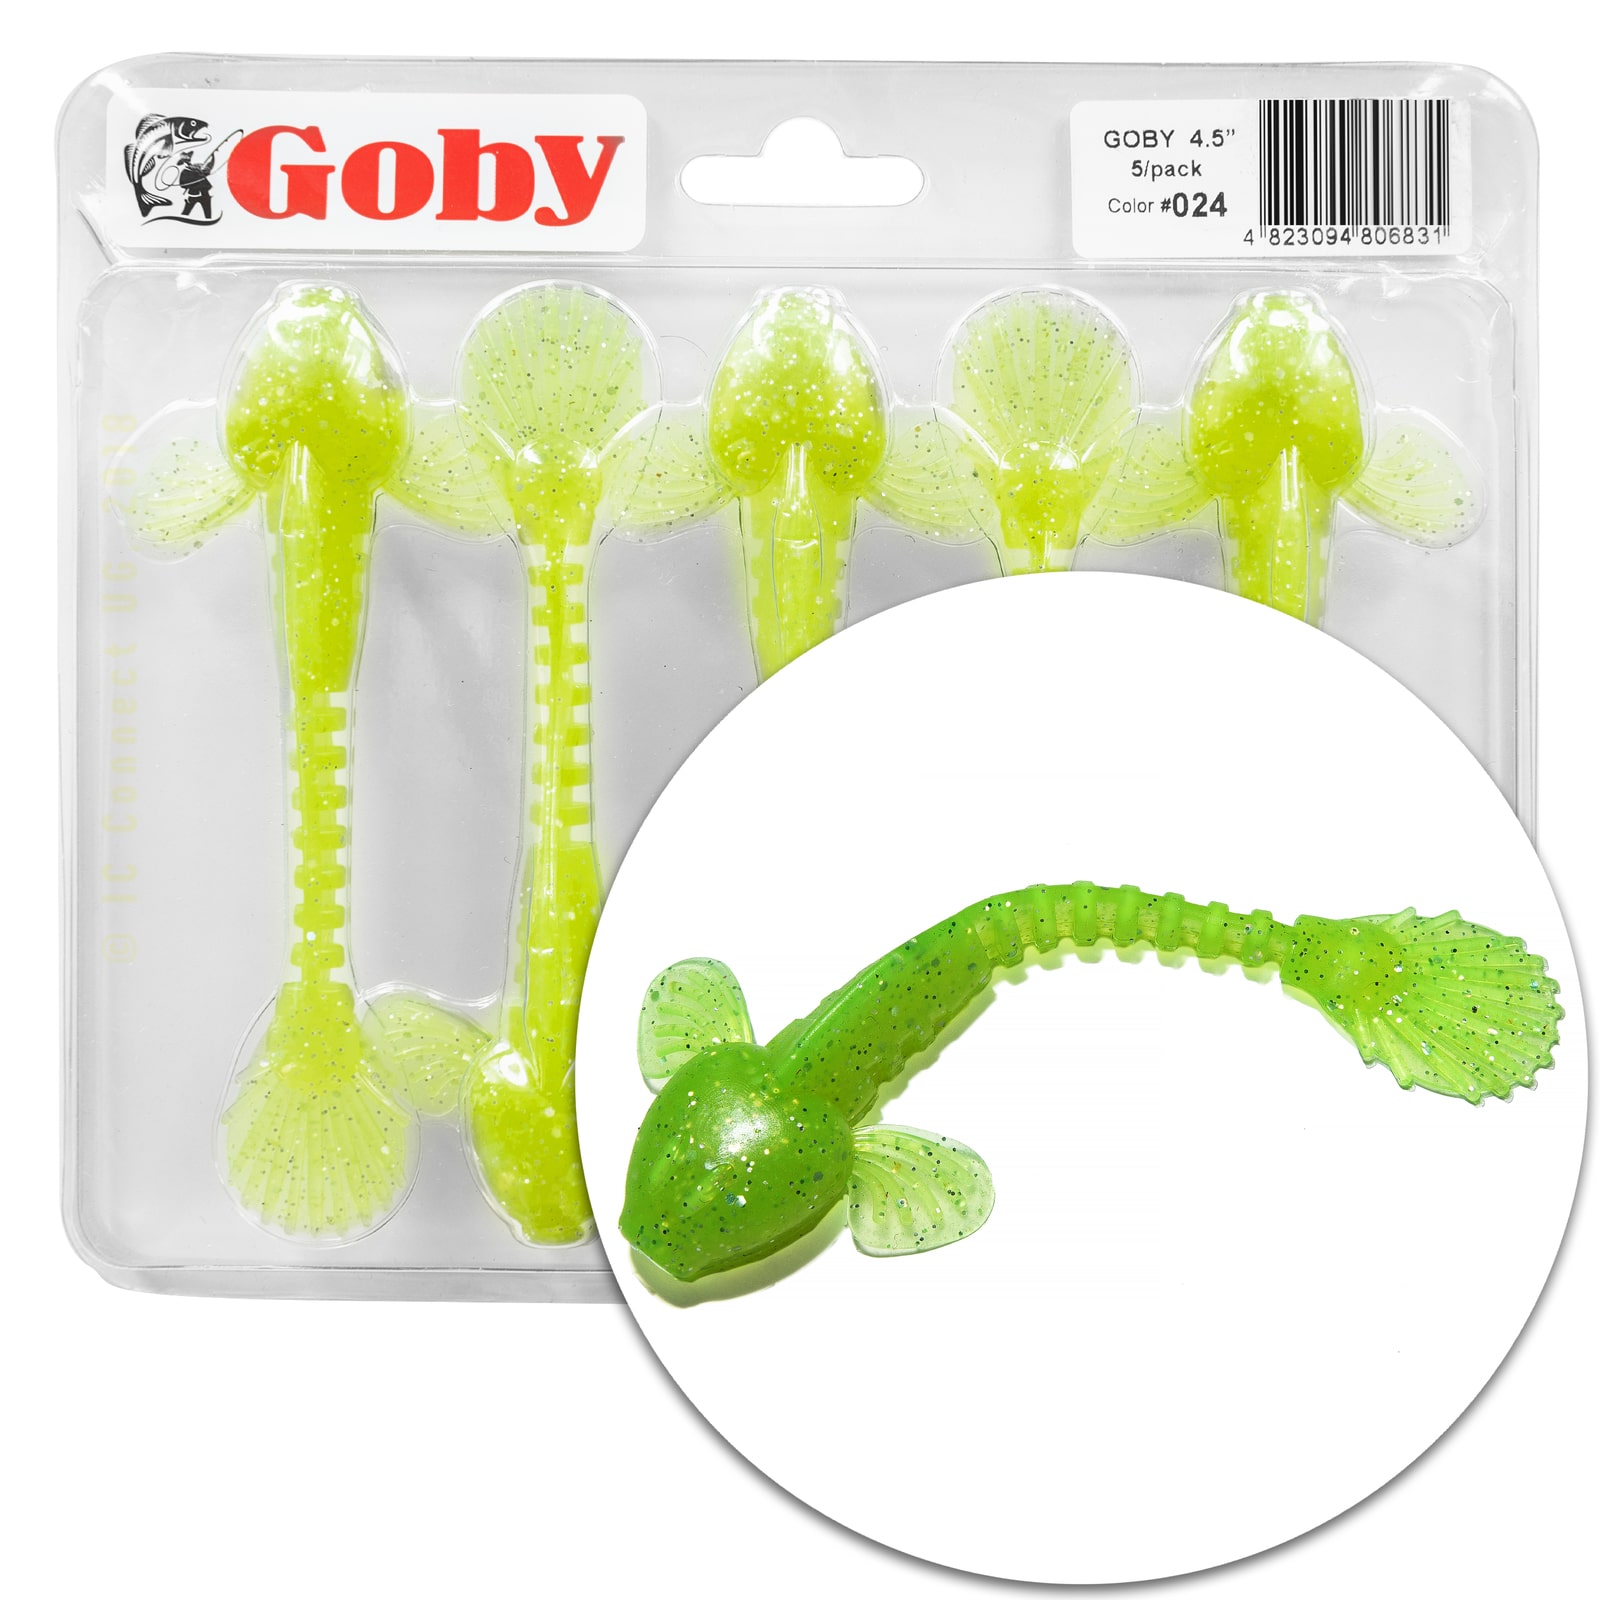 Fanatik VIPER - Best Soft Plastic Twister Tail Grub and Tackle for